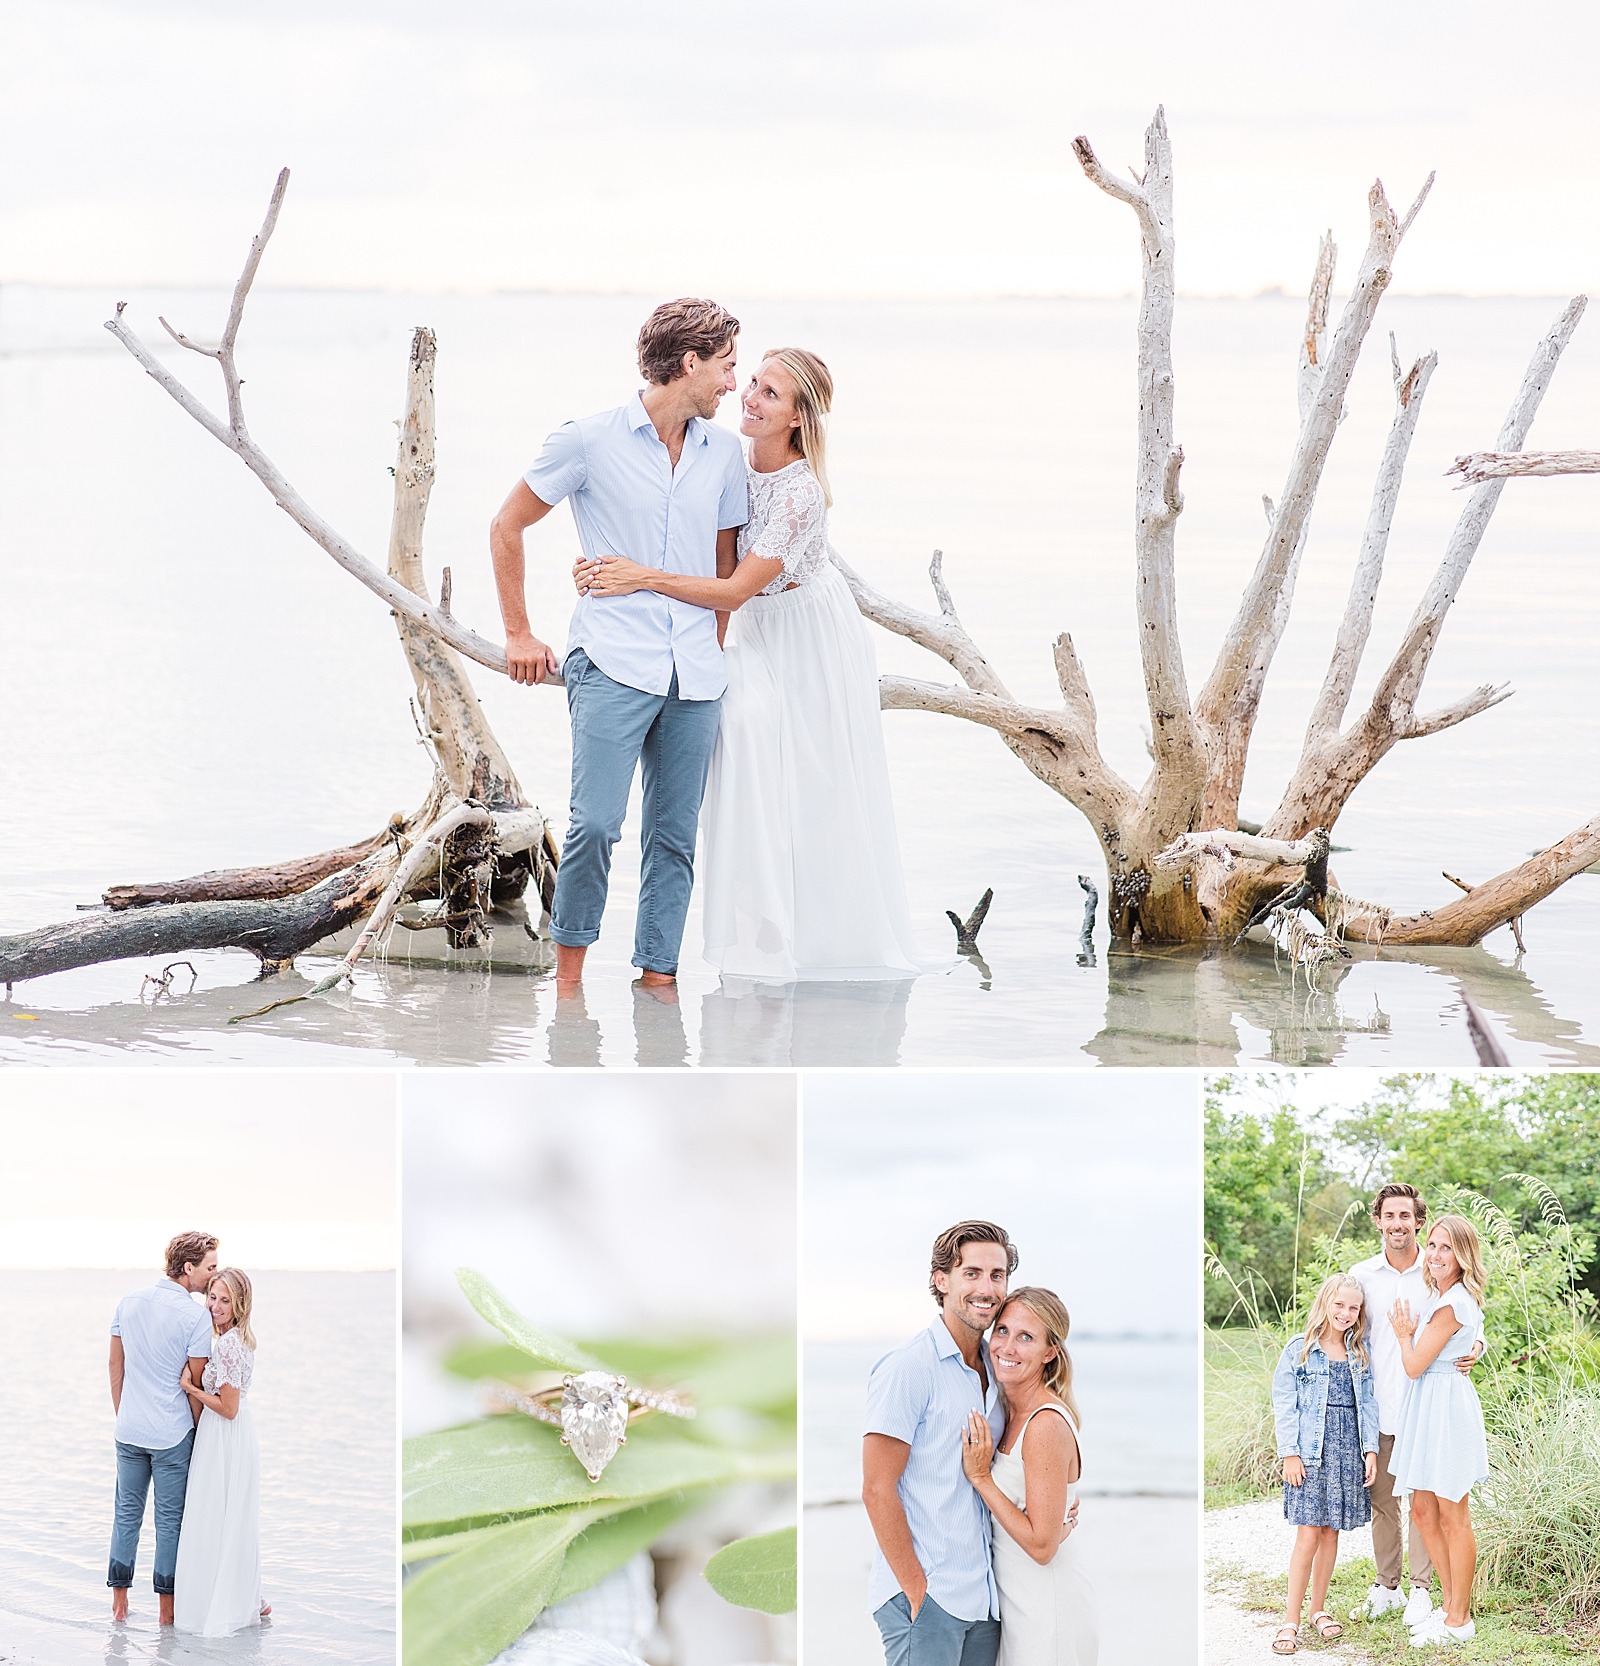 Sunset engagement pictures at Bowditch Point Beach in Fort Myers, Florida.